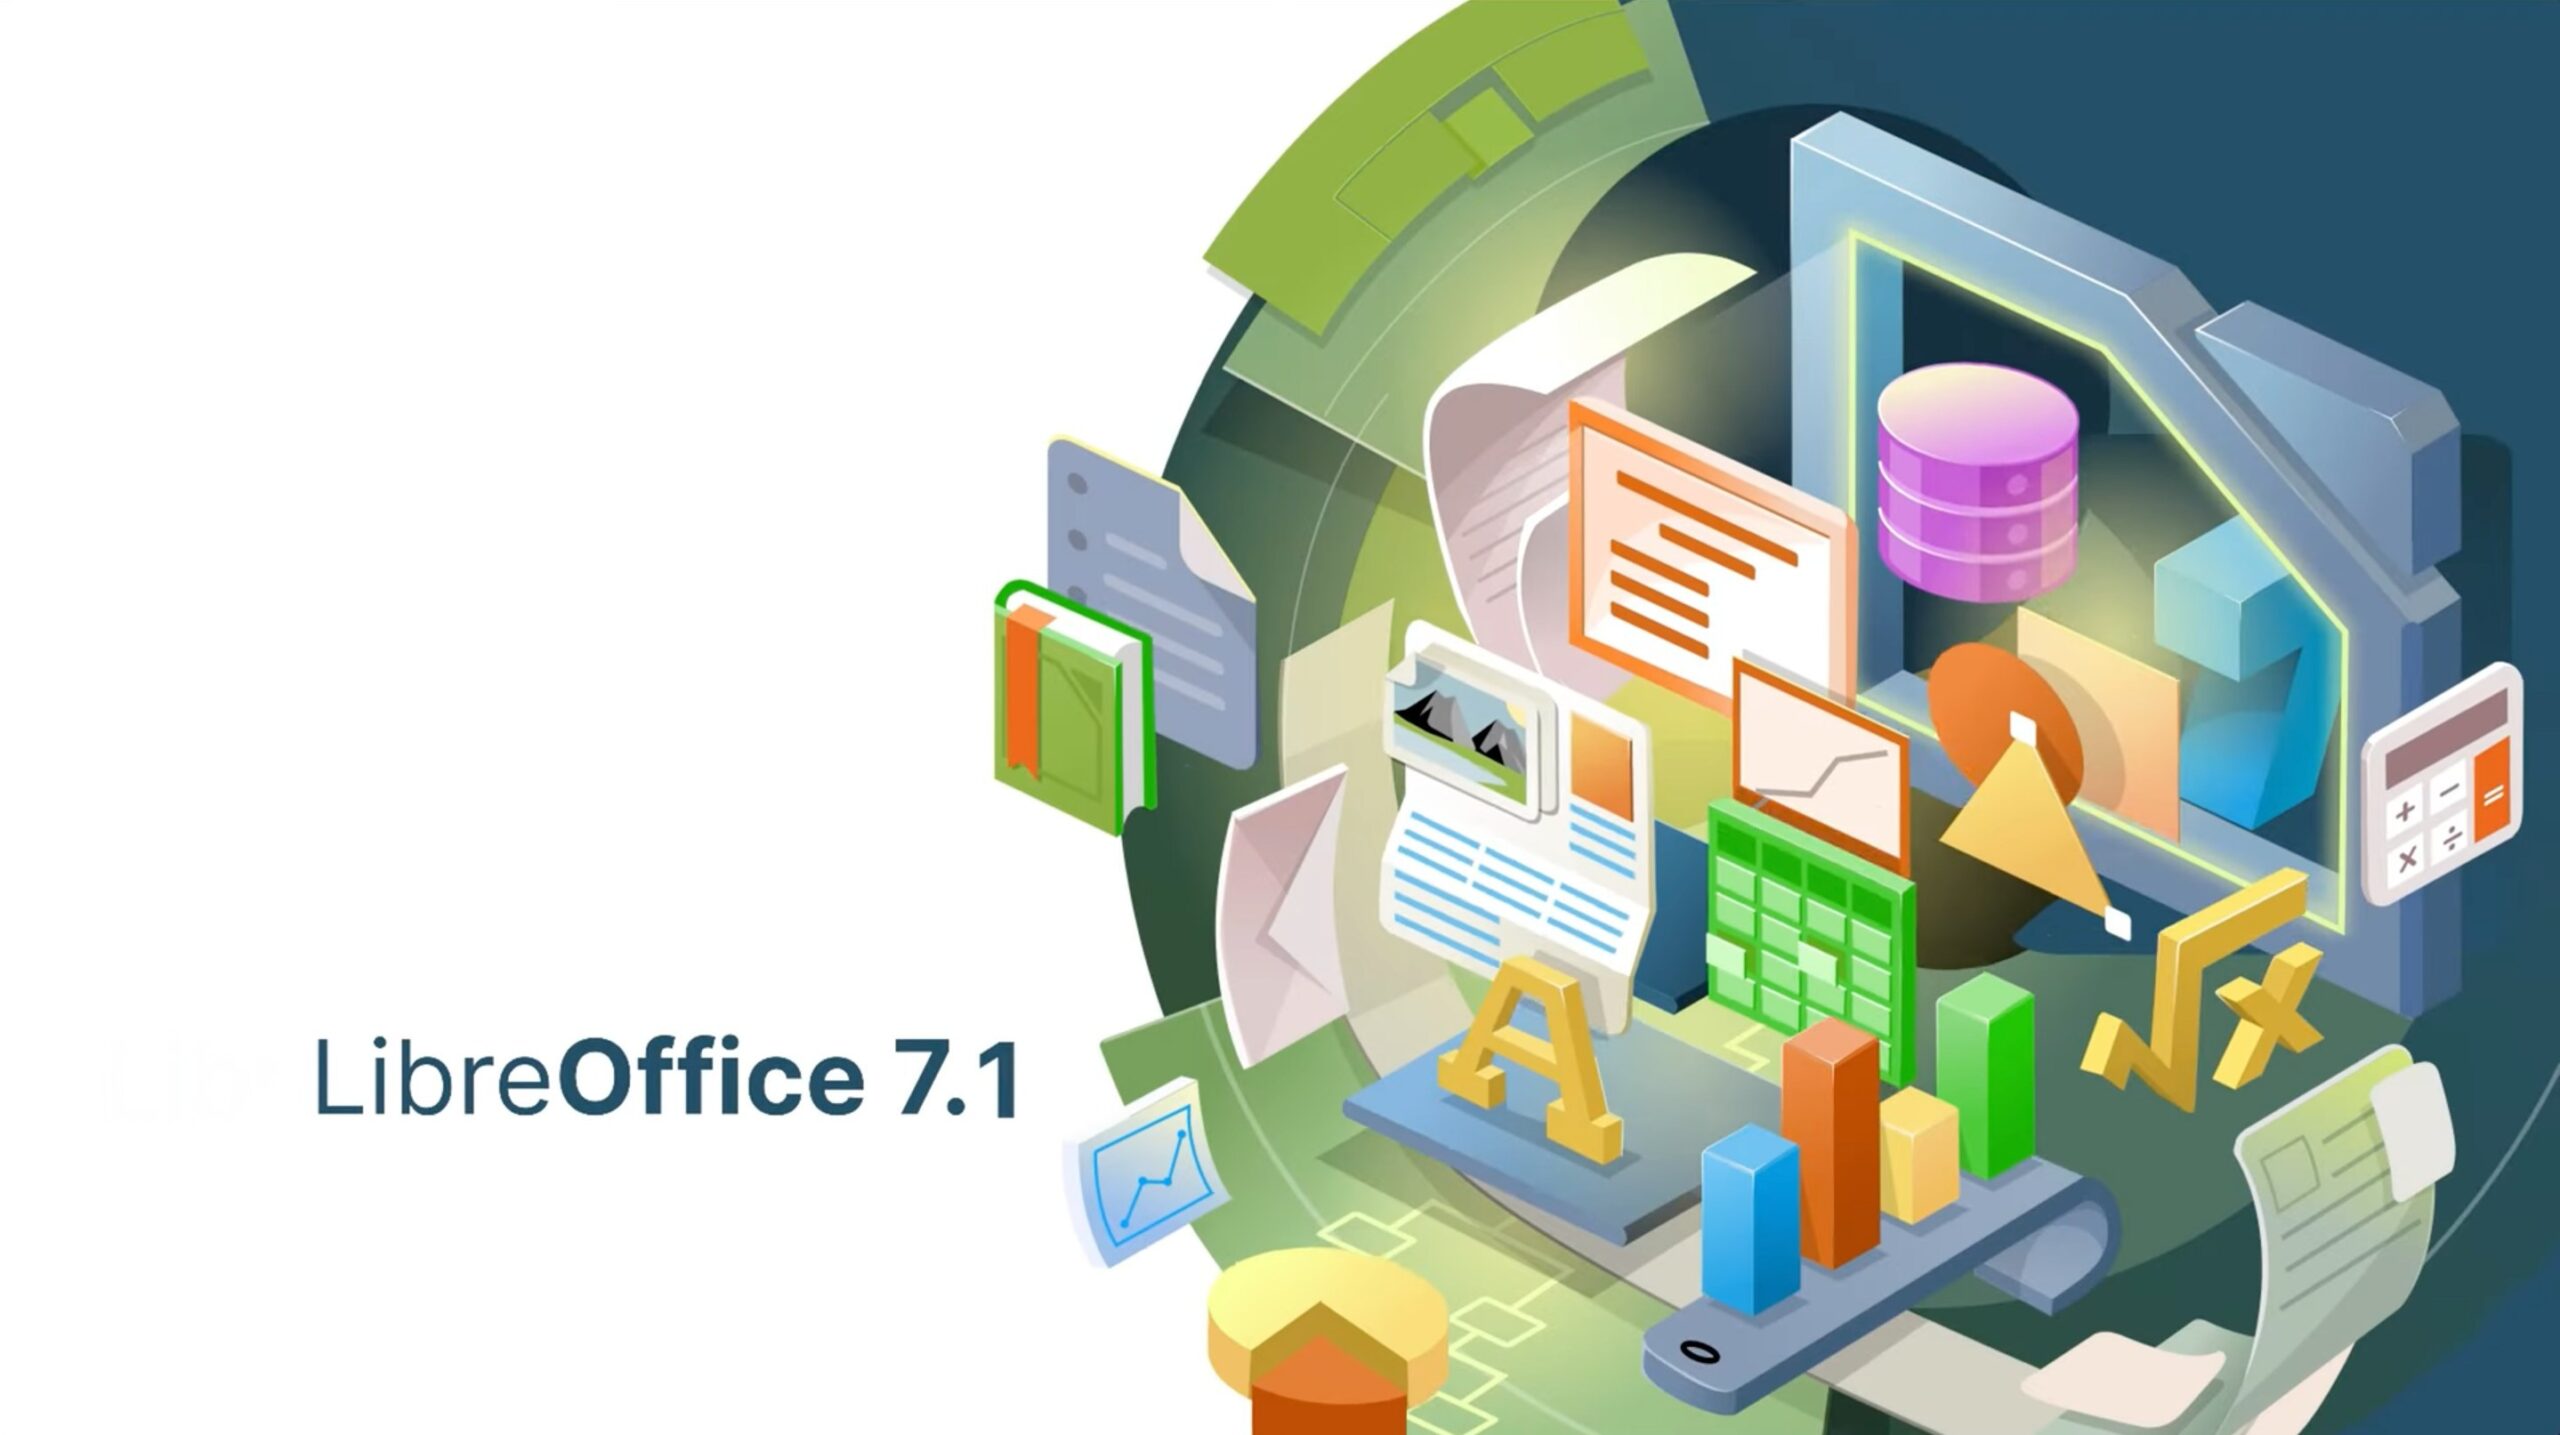 LibreOffice 7.1.4 Office Suite Released with Improved MS Office Compatibility, 79 Bug Fixes